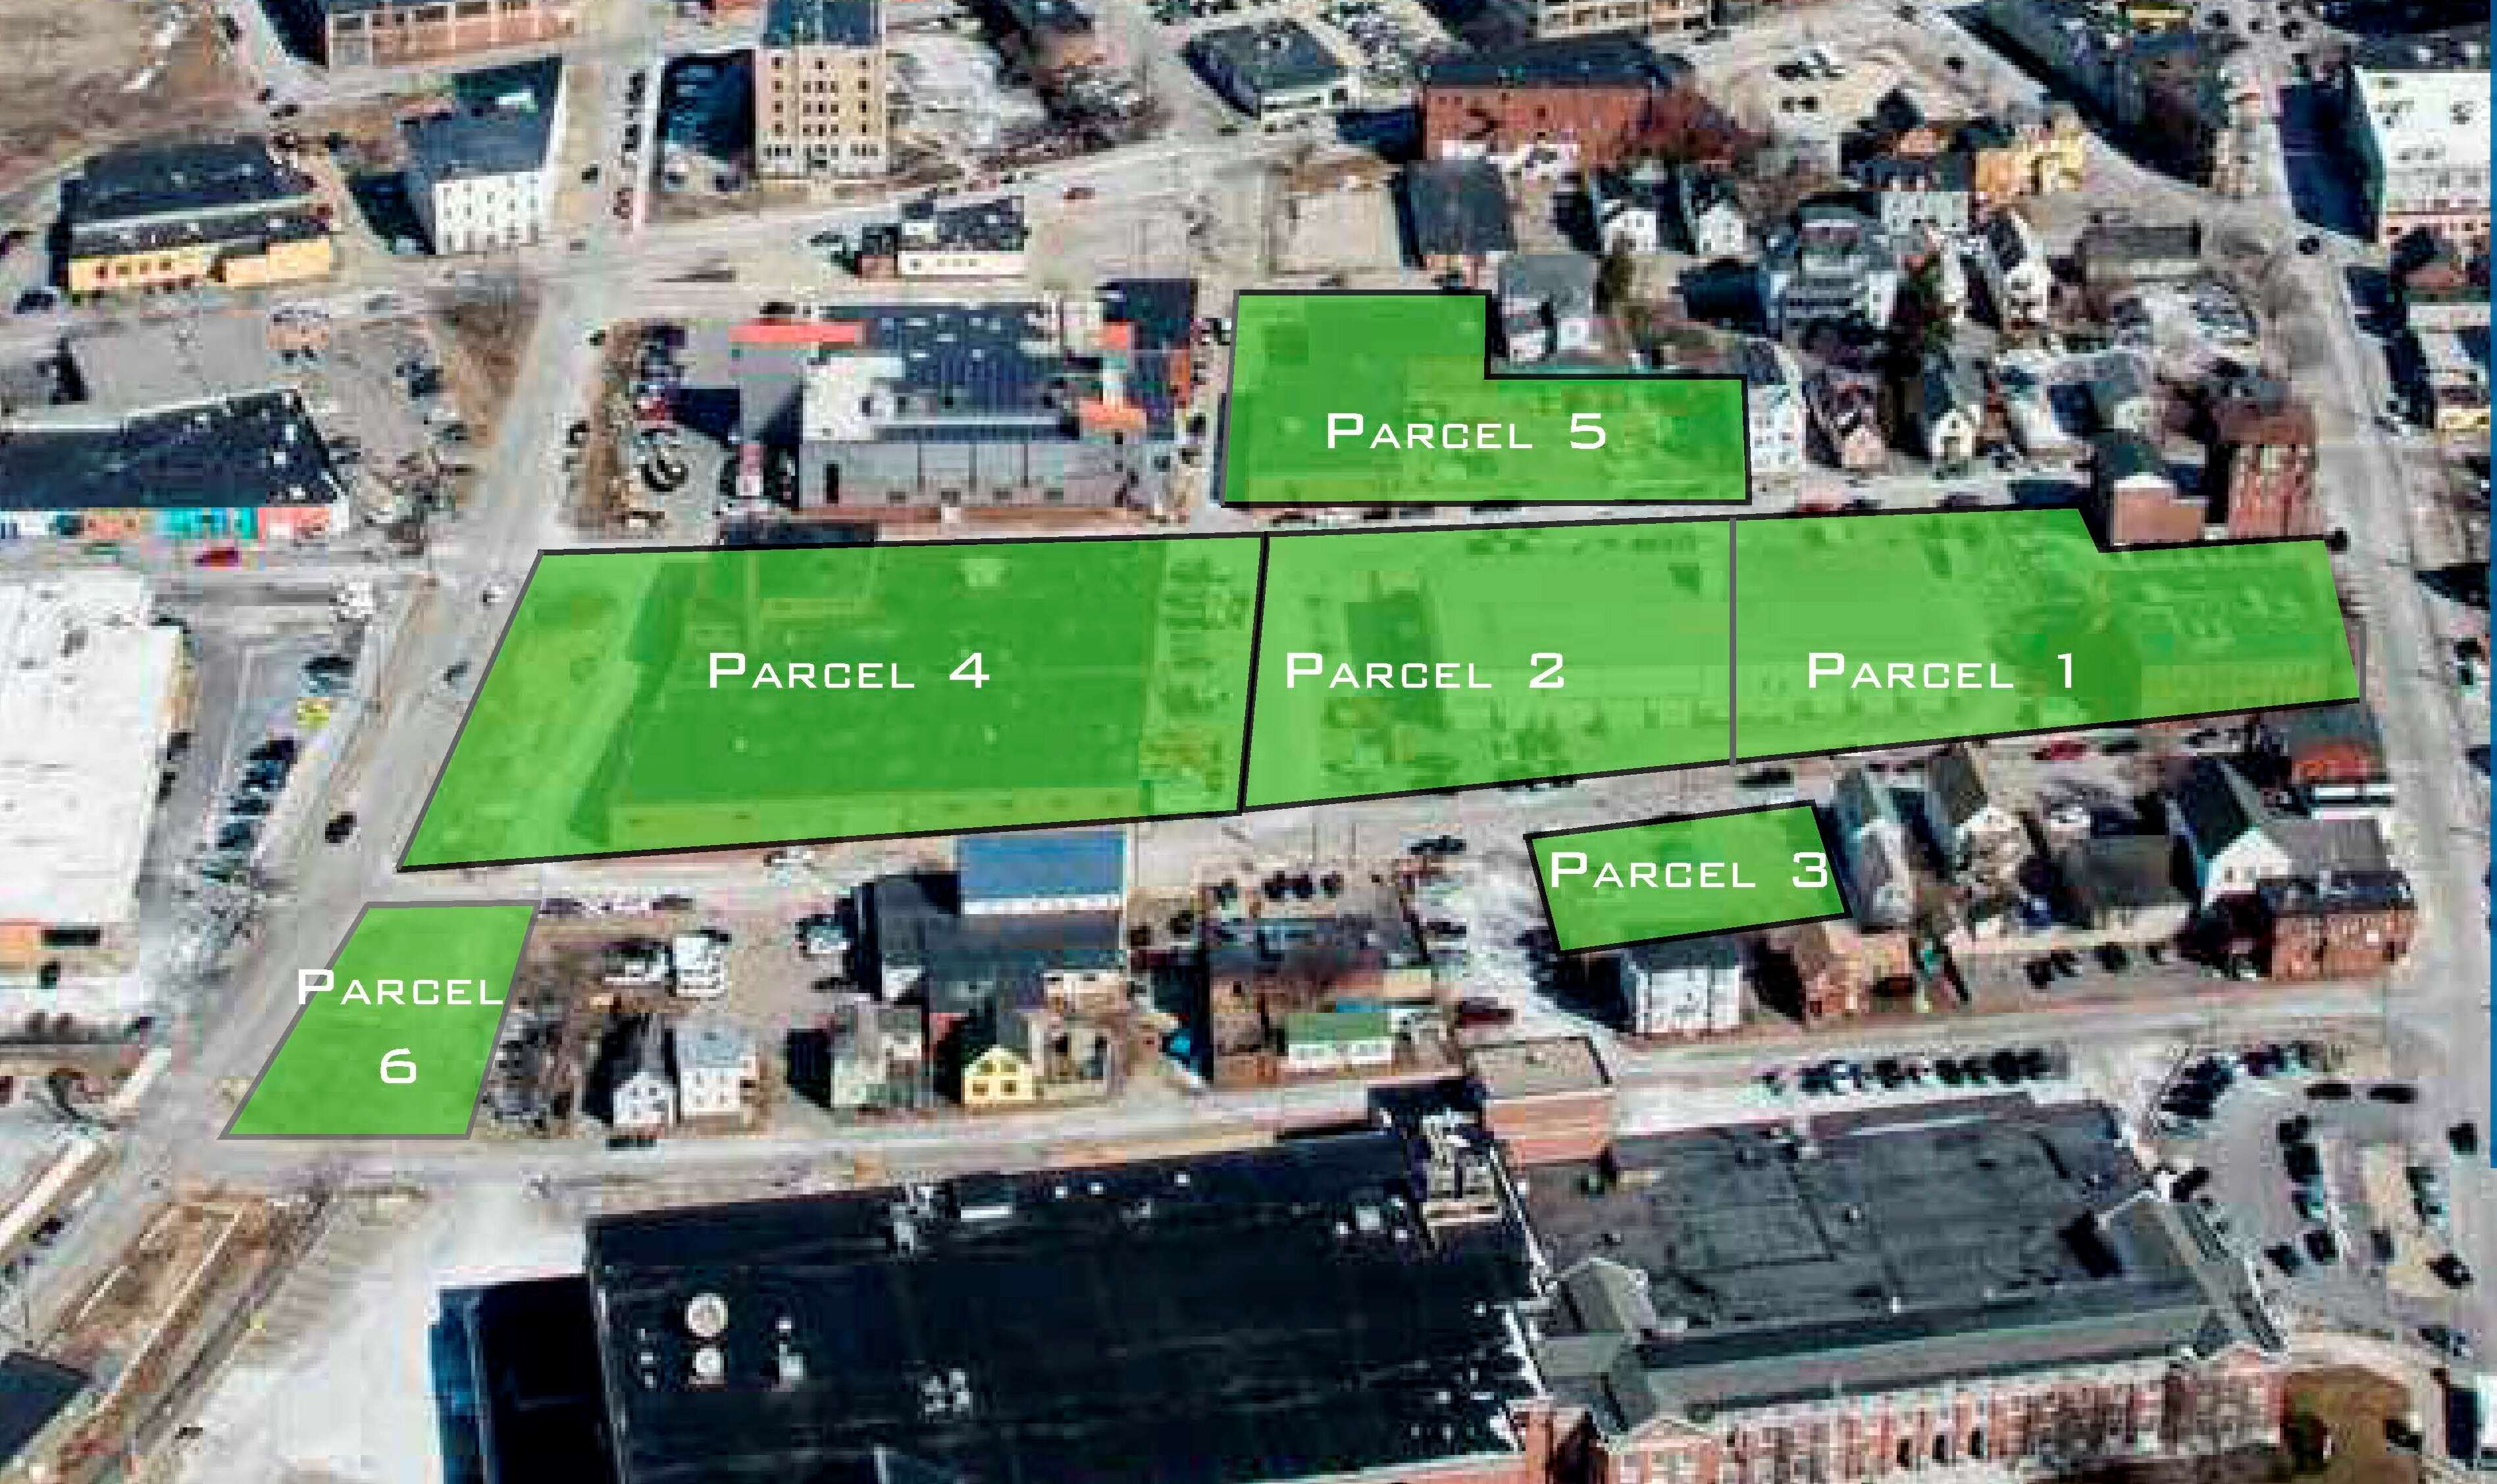 an aerial map of an industrial looking area of a city with green overlays on five parcels, numbered 1 through 5